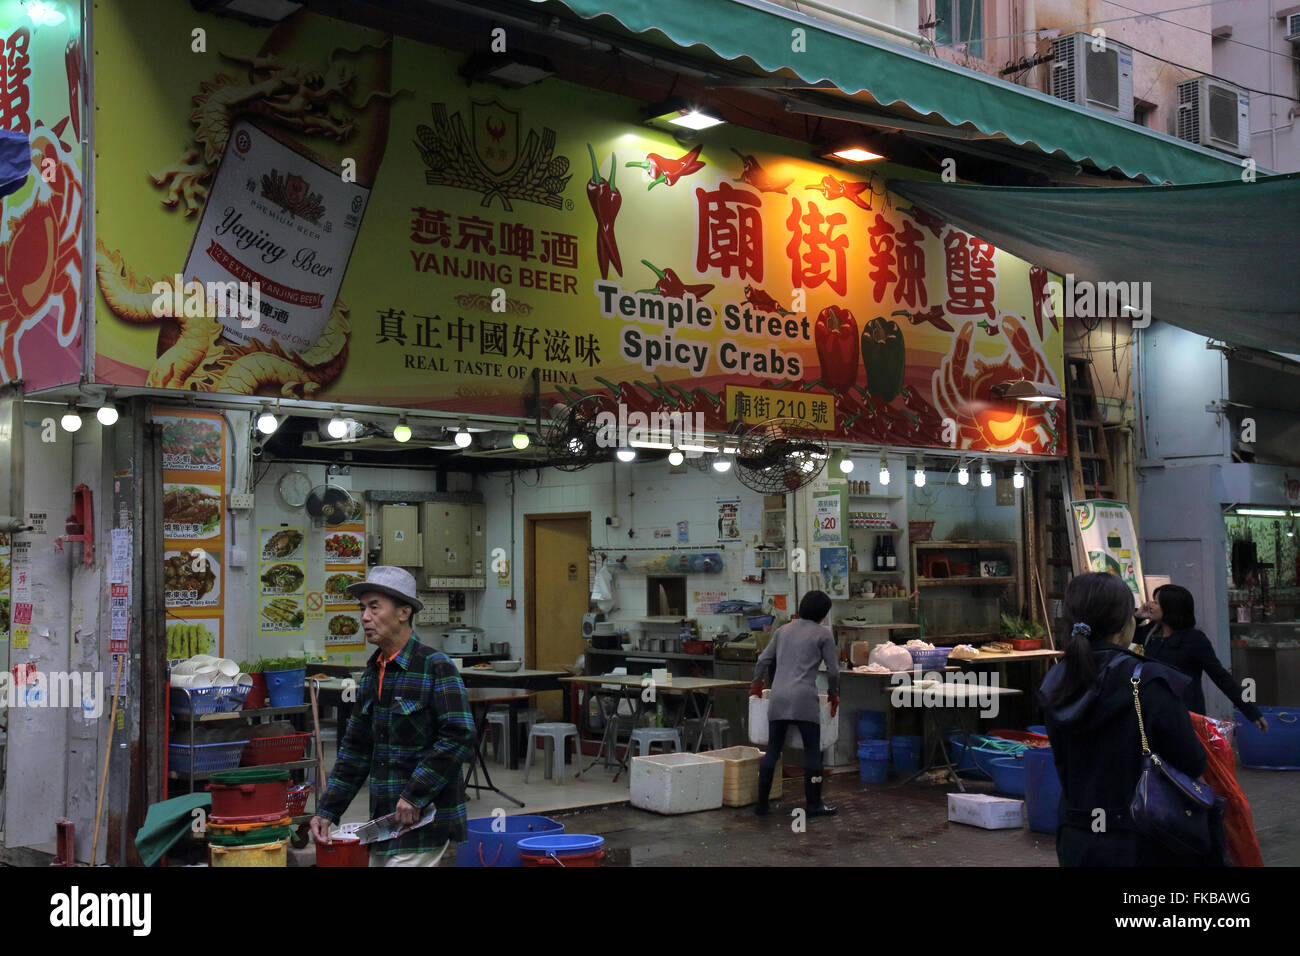 temple street night market in hong kong selling spicy and live crabs Stock Photo